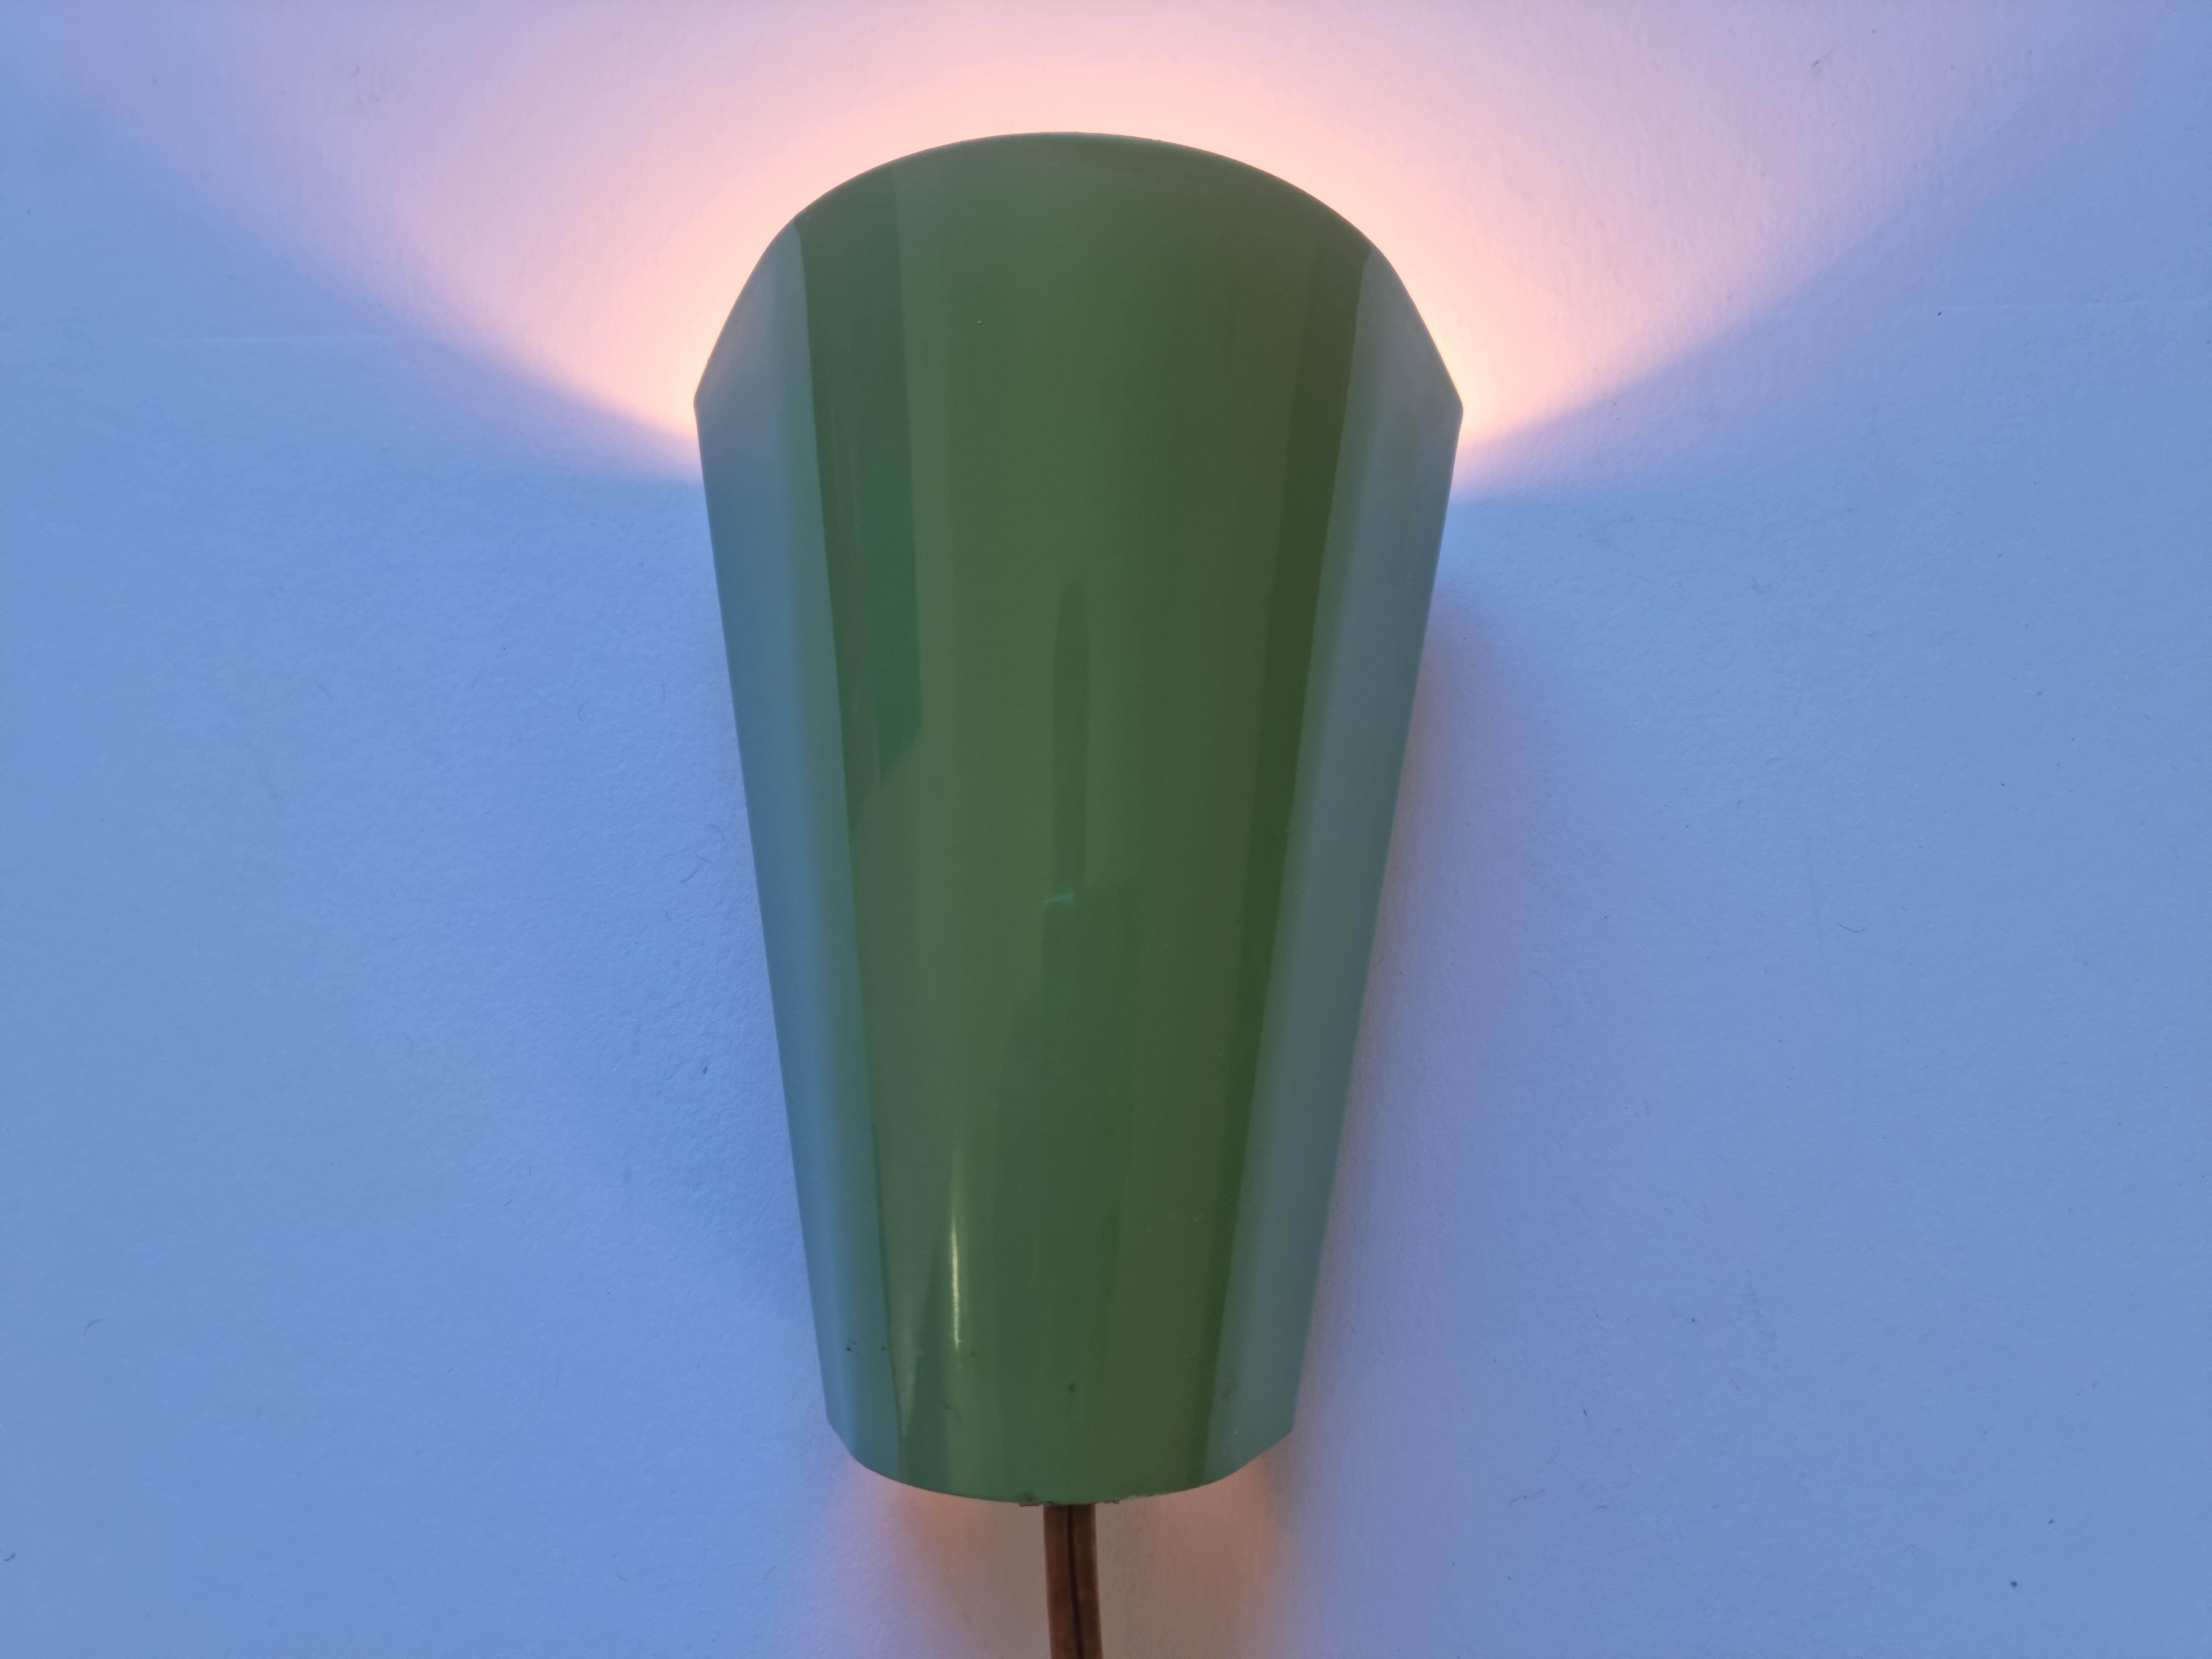 Midcentury Rare Wall Lamp Lidokov, Designed by Josef Hurka, 1960s For Sale 4